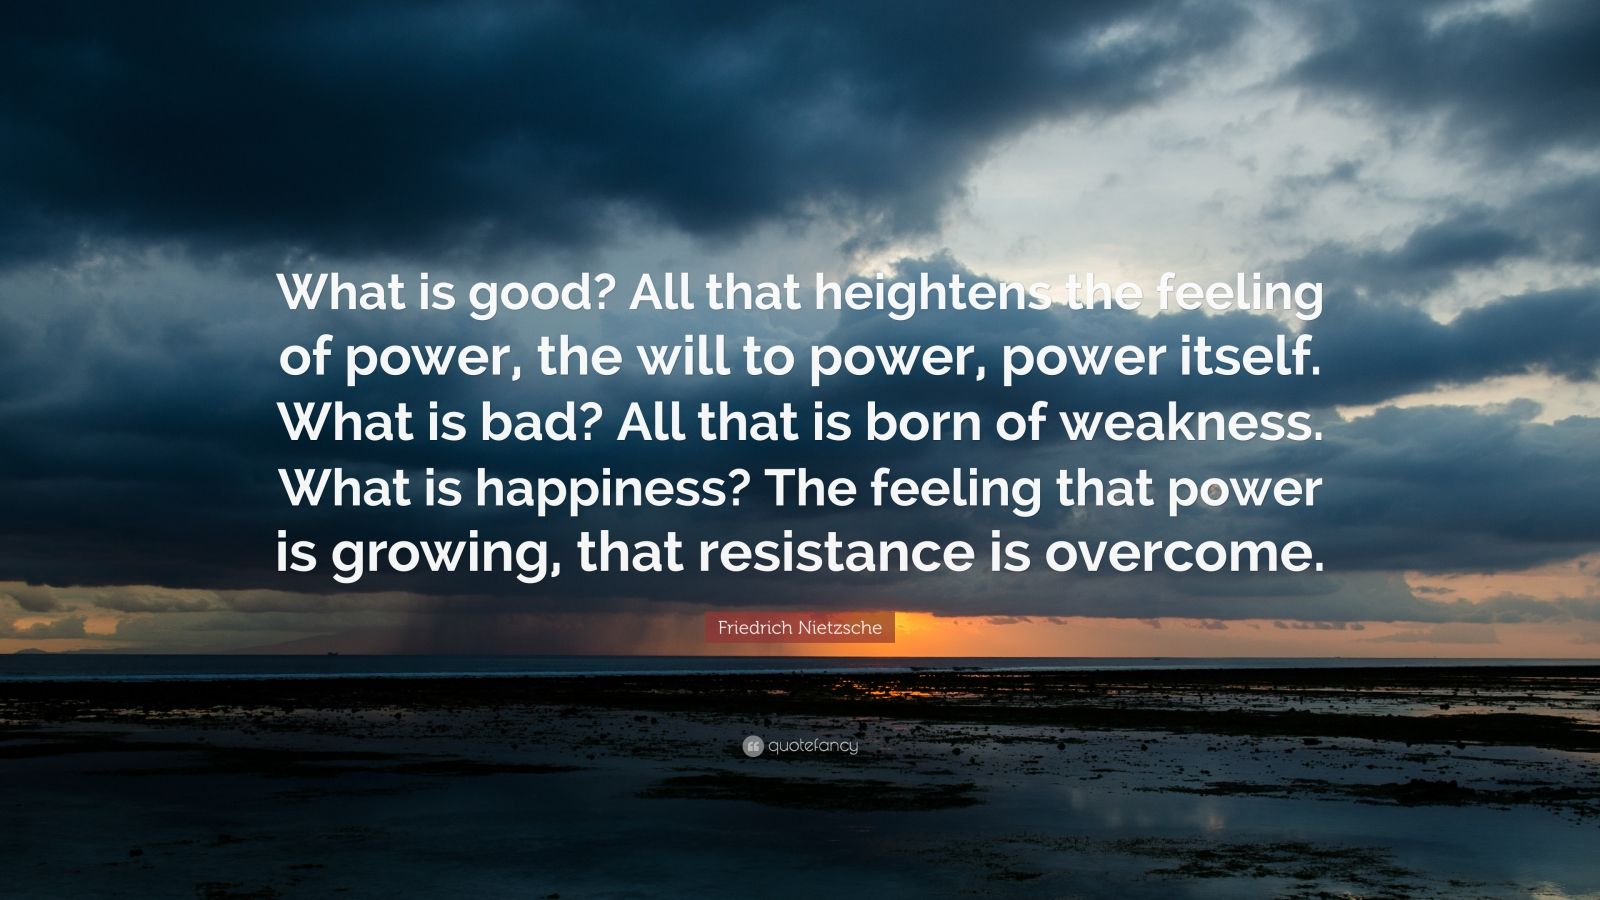 Friedrich Nietzsche Quote: “What is good? All that heightens the ...